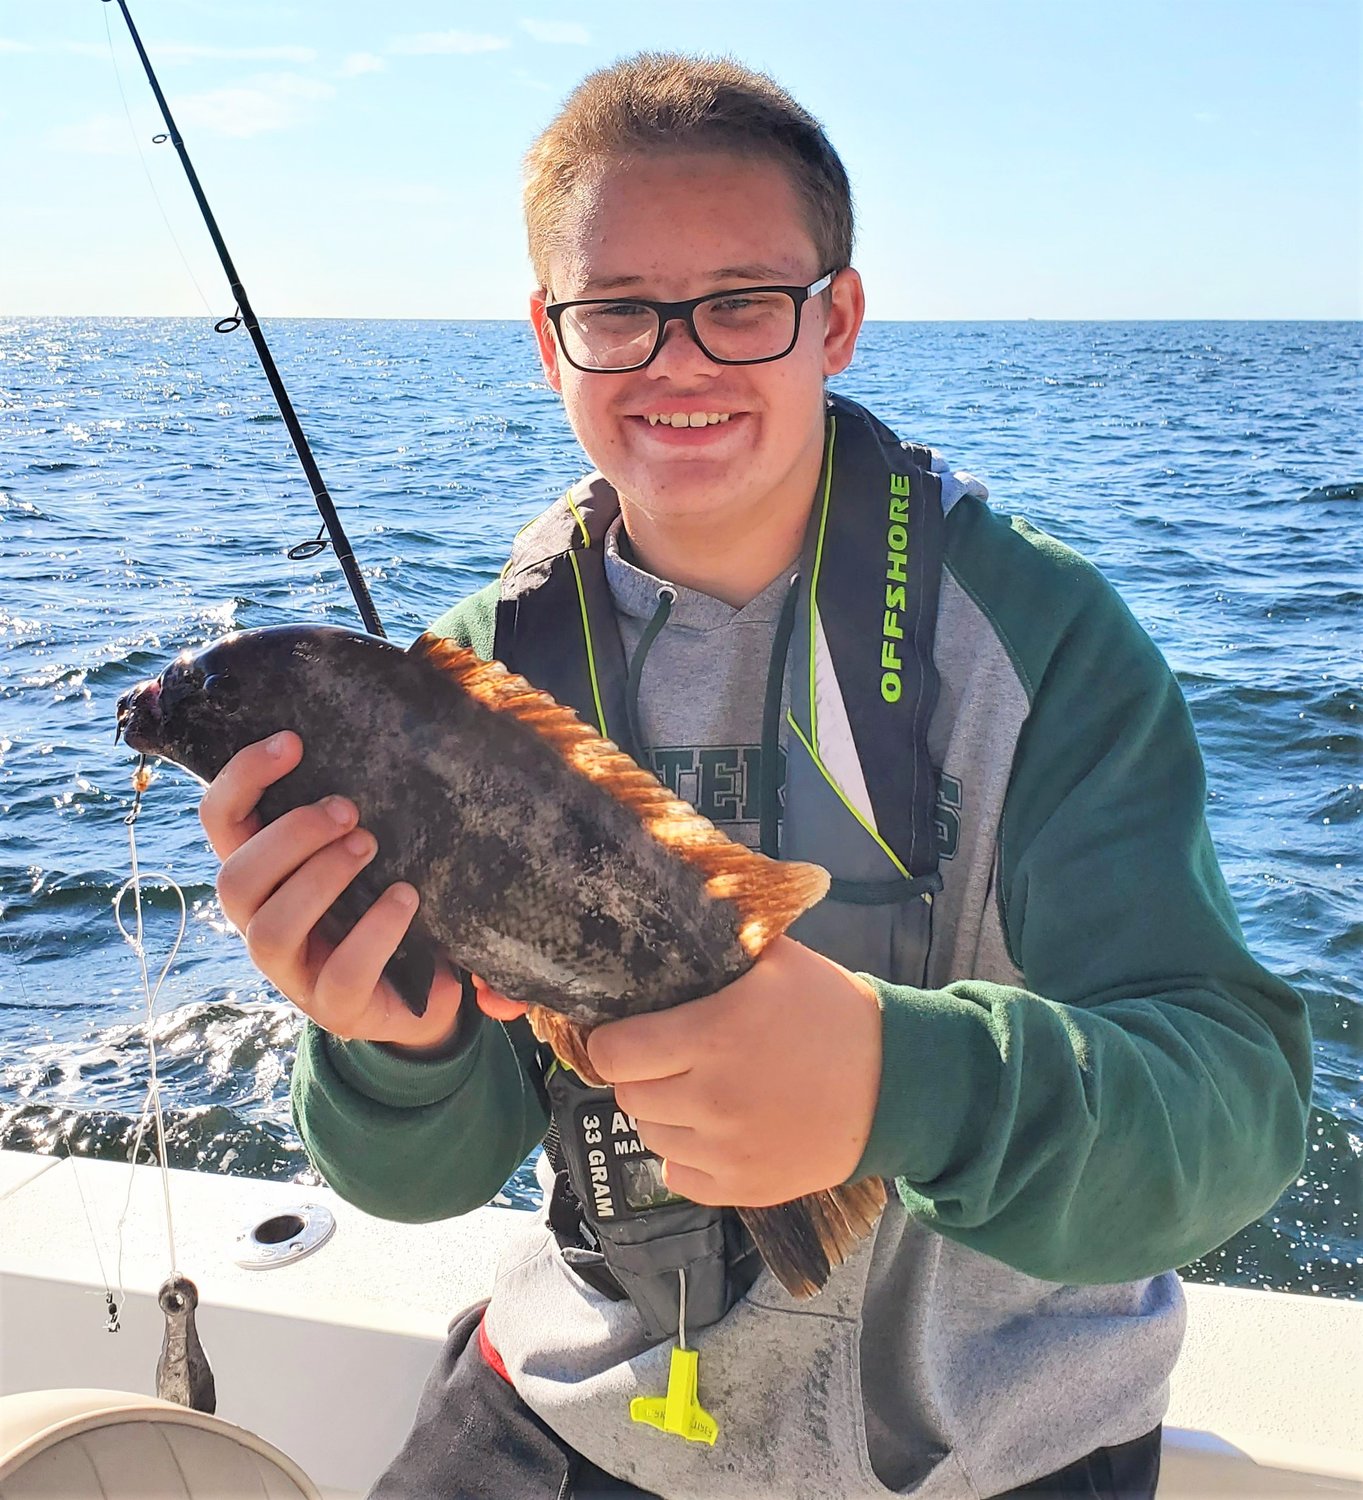 Strong tautog bite: Blake Webster with one of the tautog to 20” that he and his family caught off Newport this week.